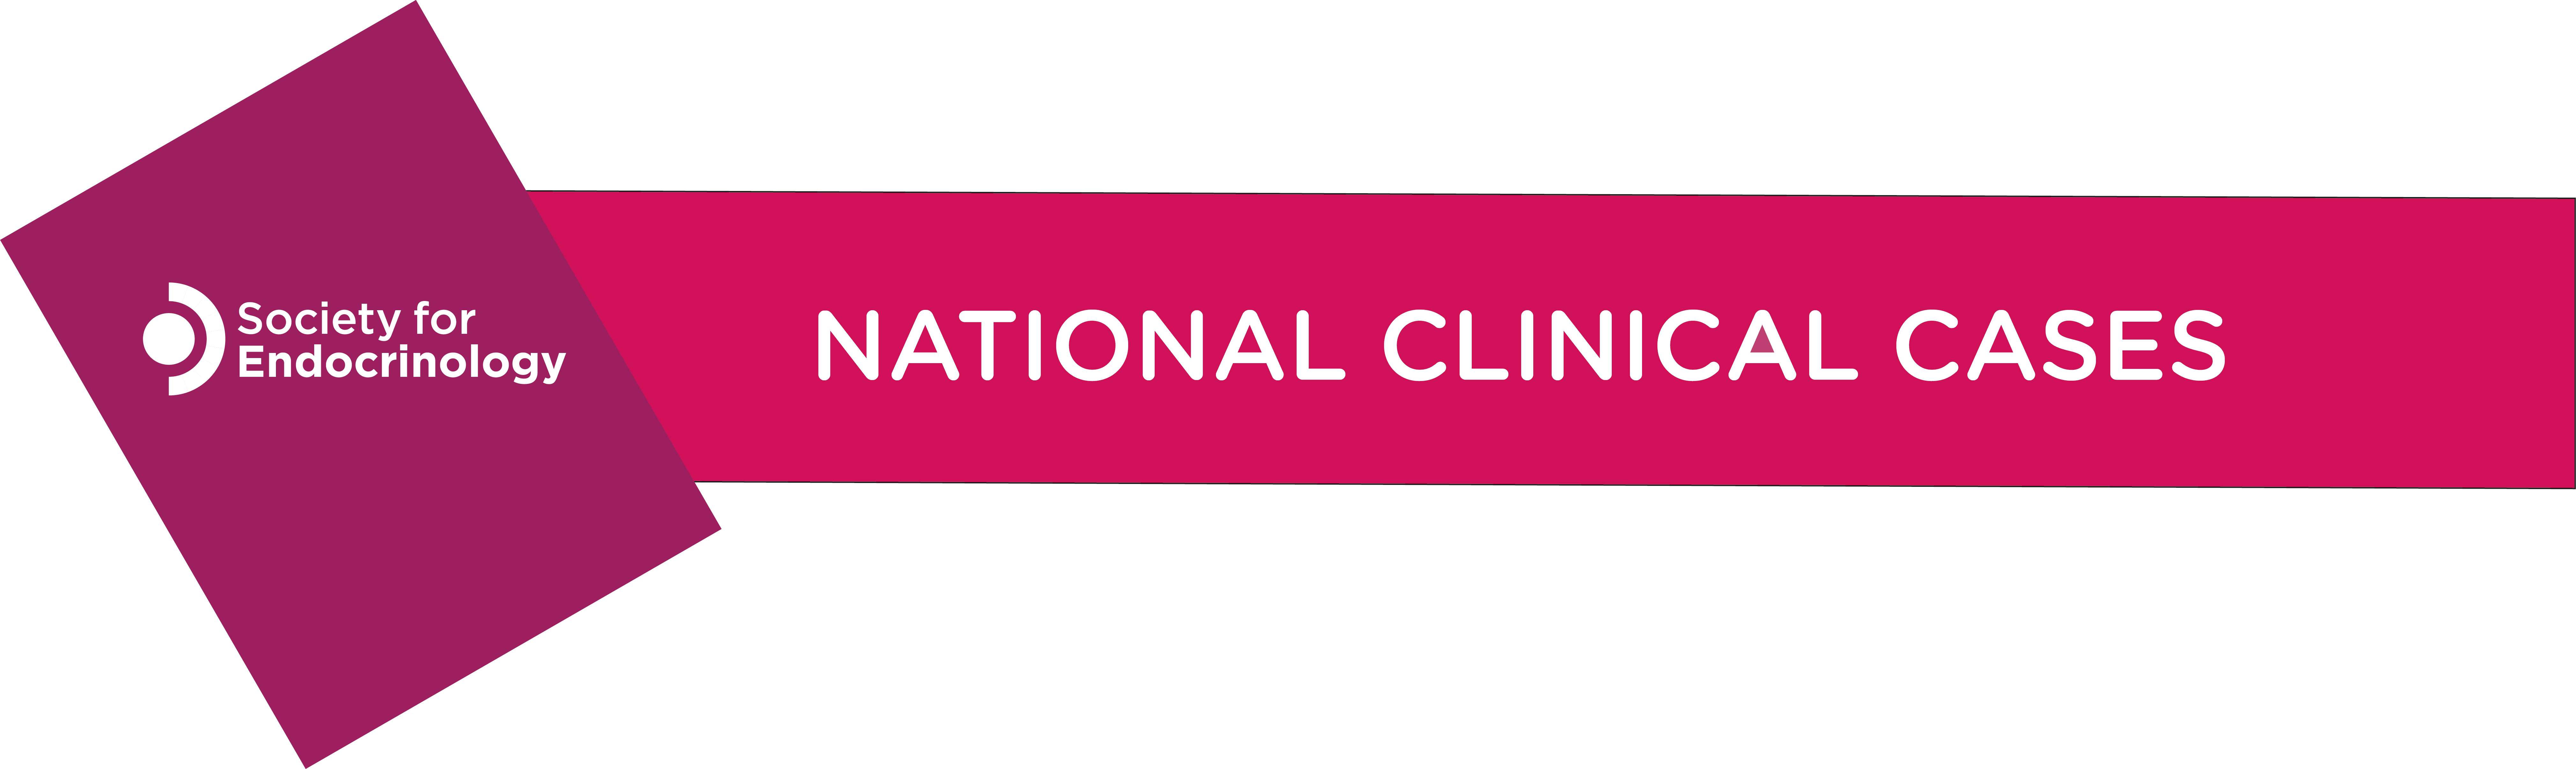 National Clinical Cases 2019